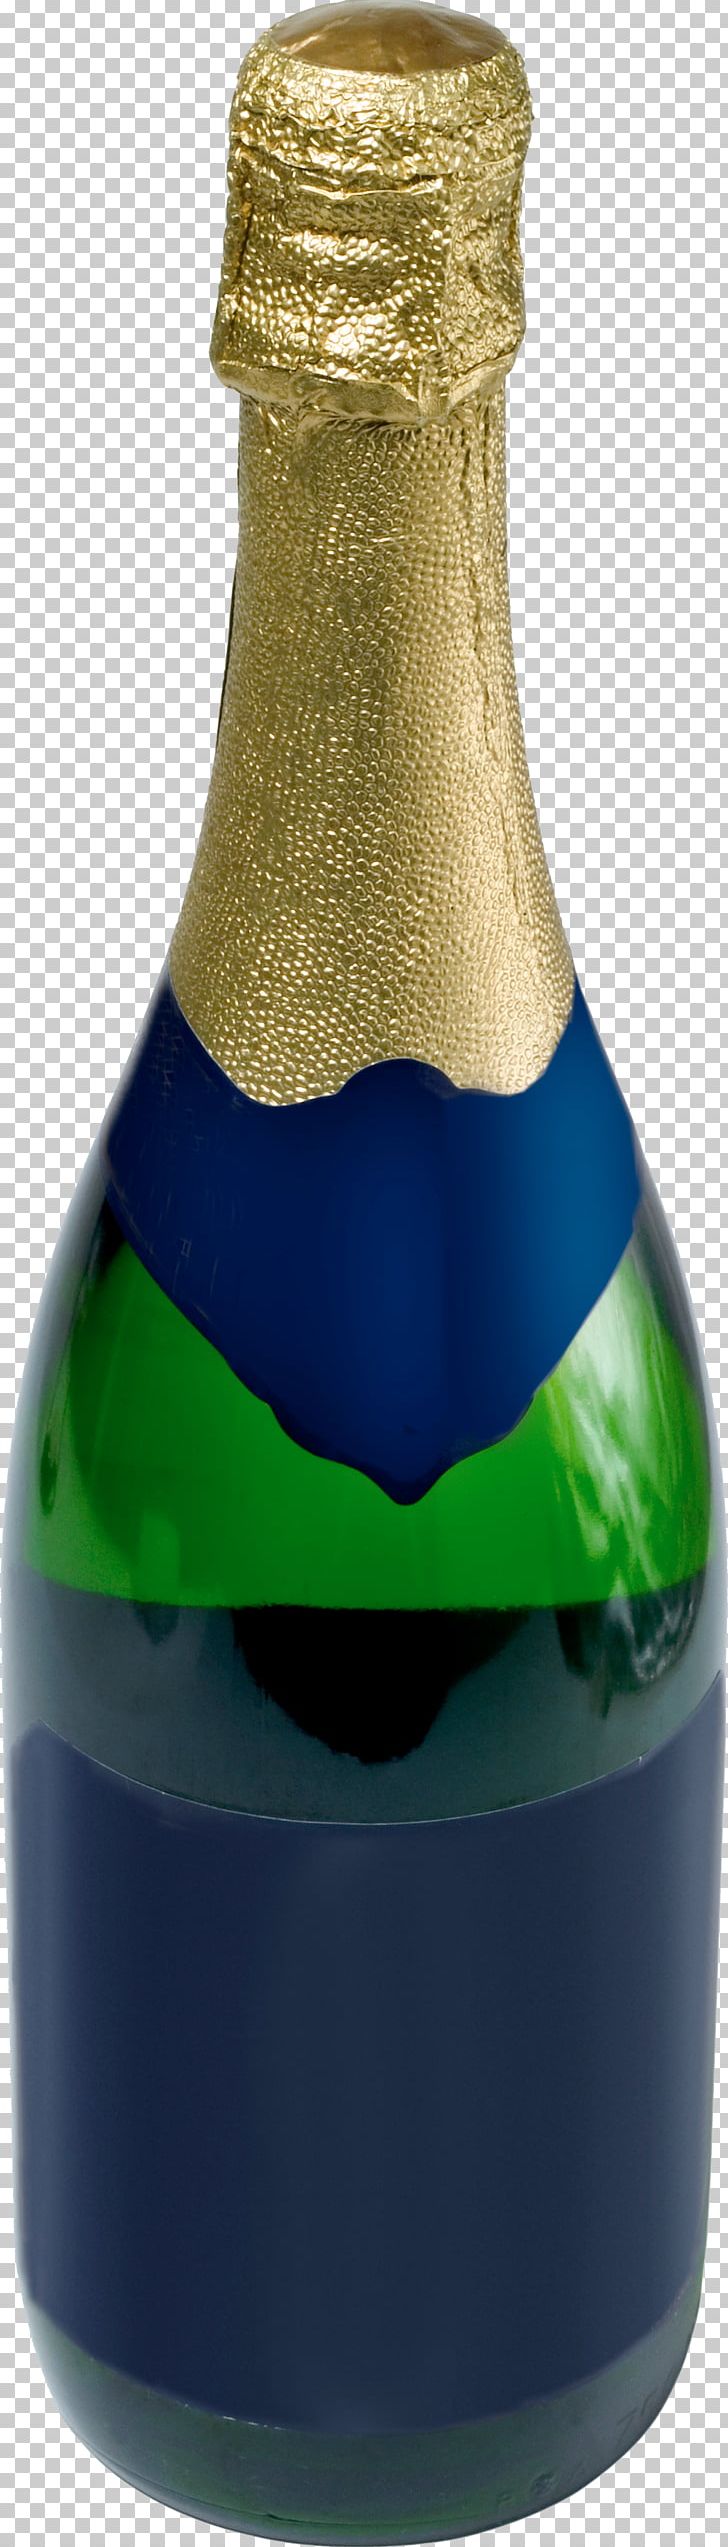 Red Wine Champagne Bottle PNG, Clipart, Barware, Beer Bottle, Bottle, Bottle Pictures, Bottles Free PNG Download